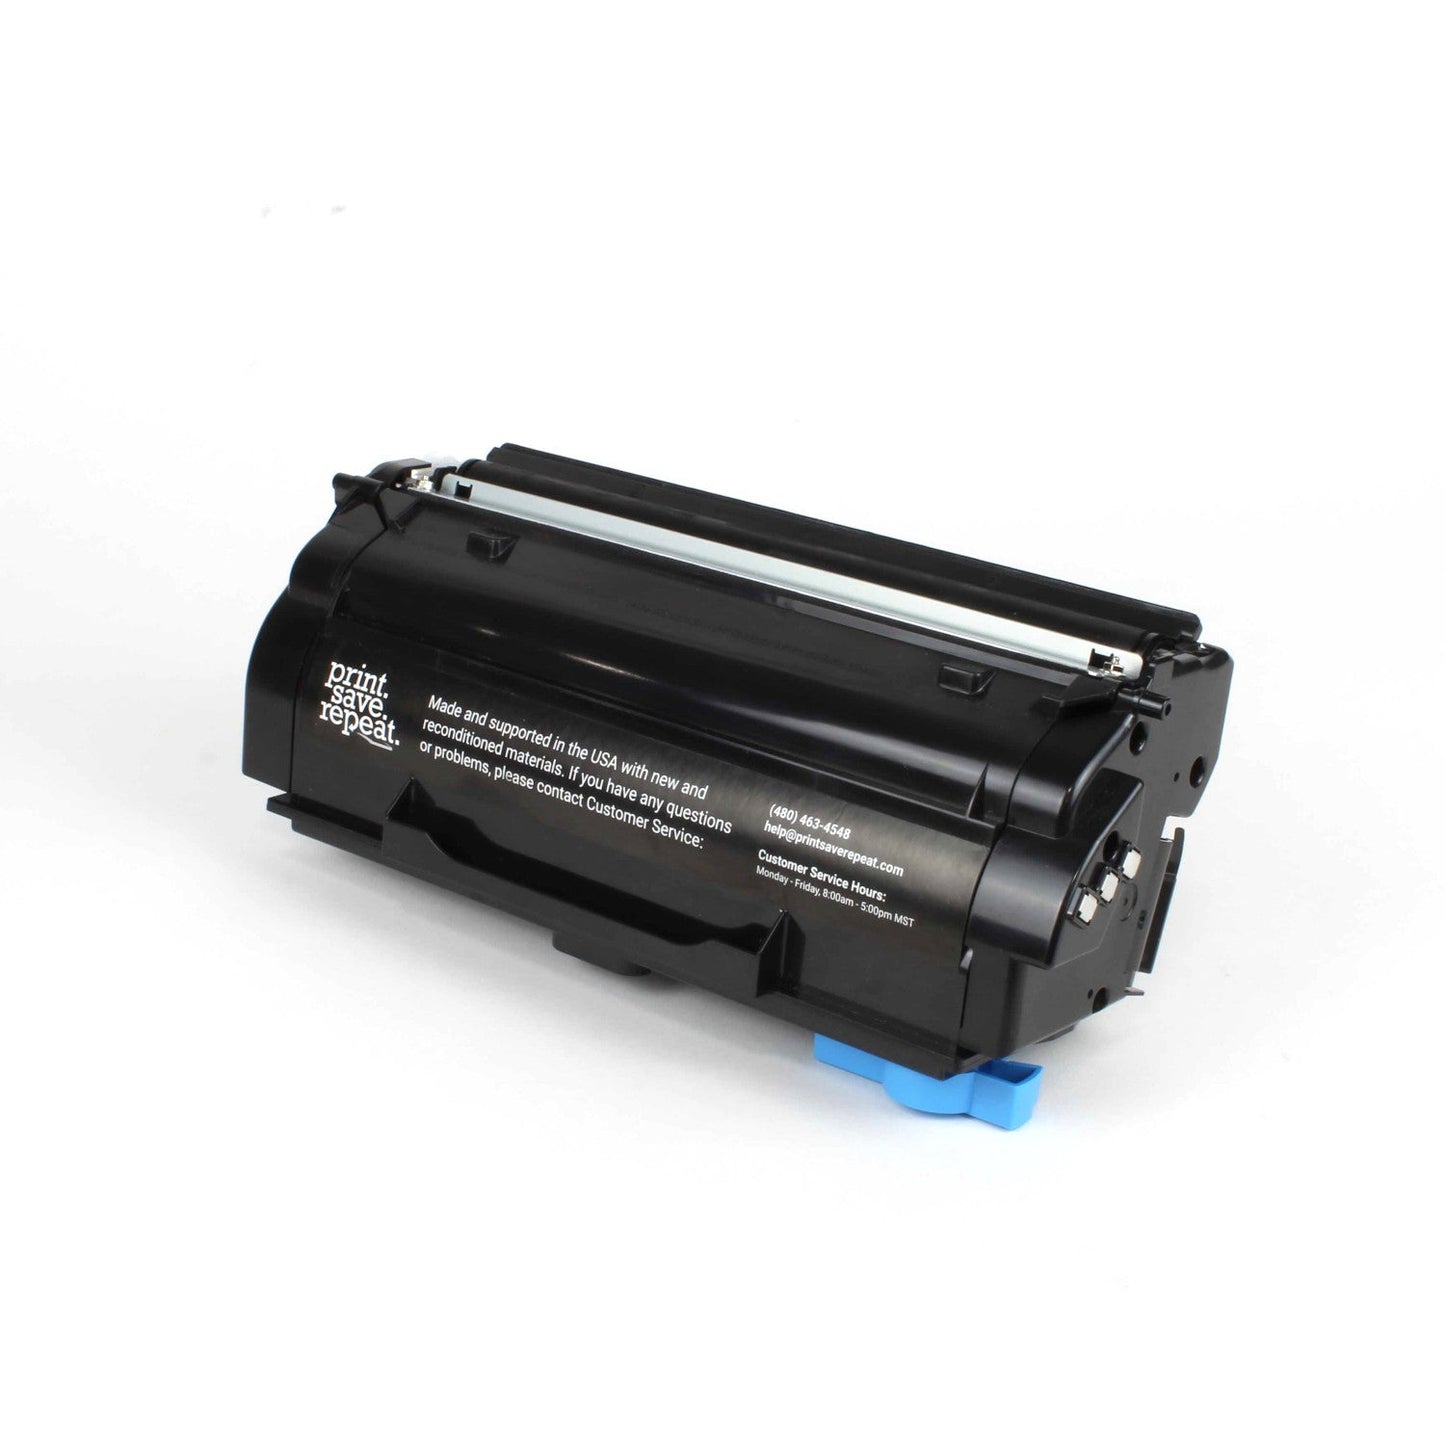 Print.Save.Repeat. Lexmark 55B1000 Remanufactured Toner Cartridge for MS331, MS431, MX331, MX431 [3,000 Pages]